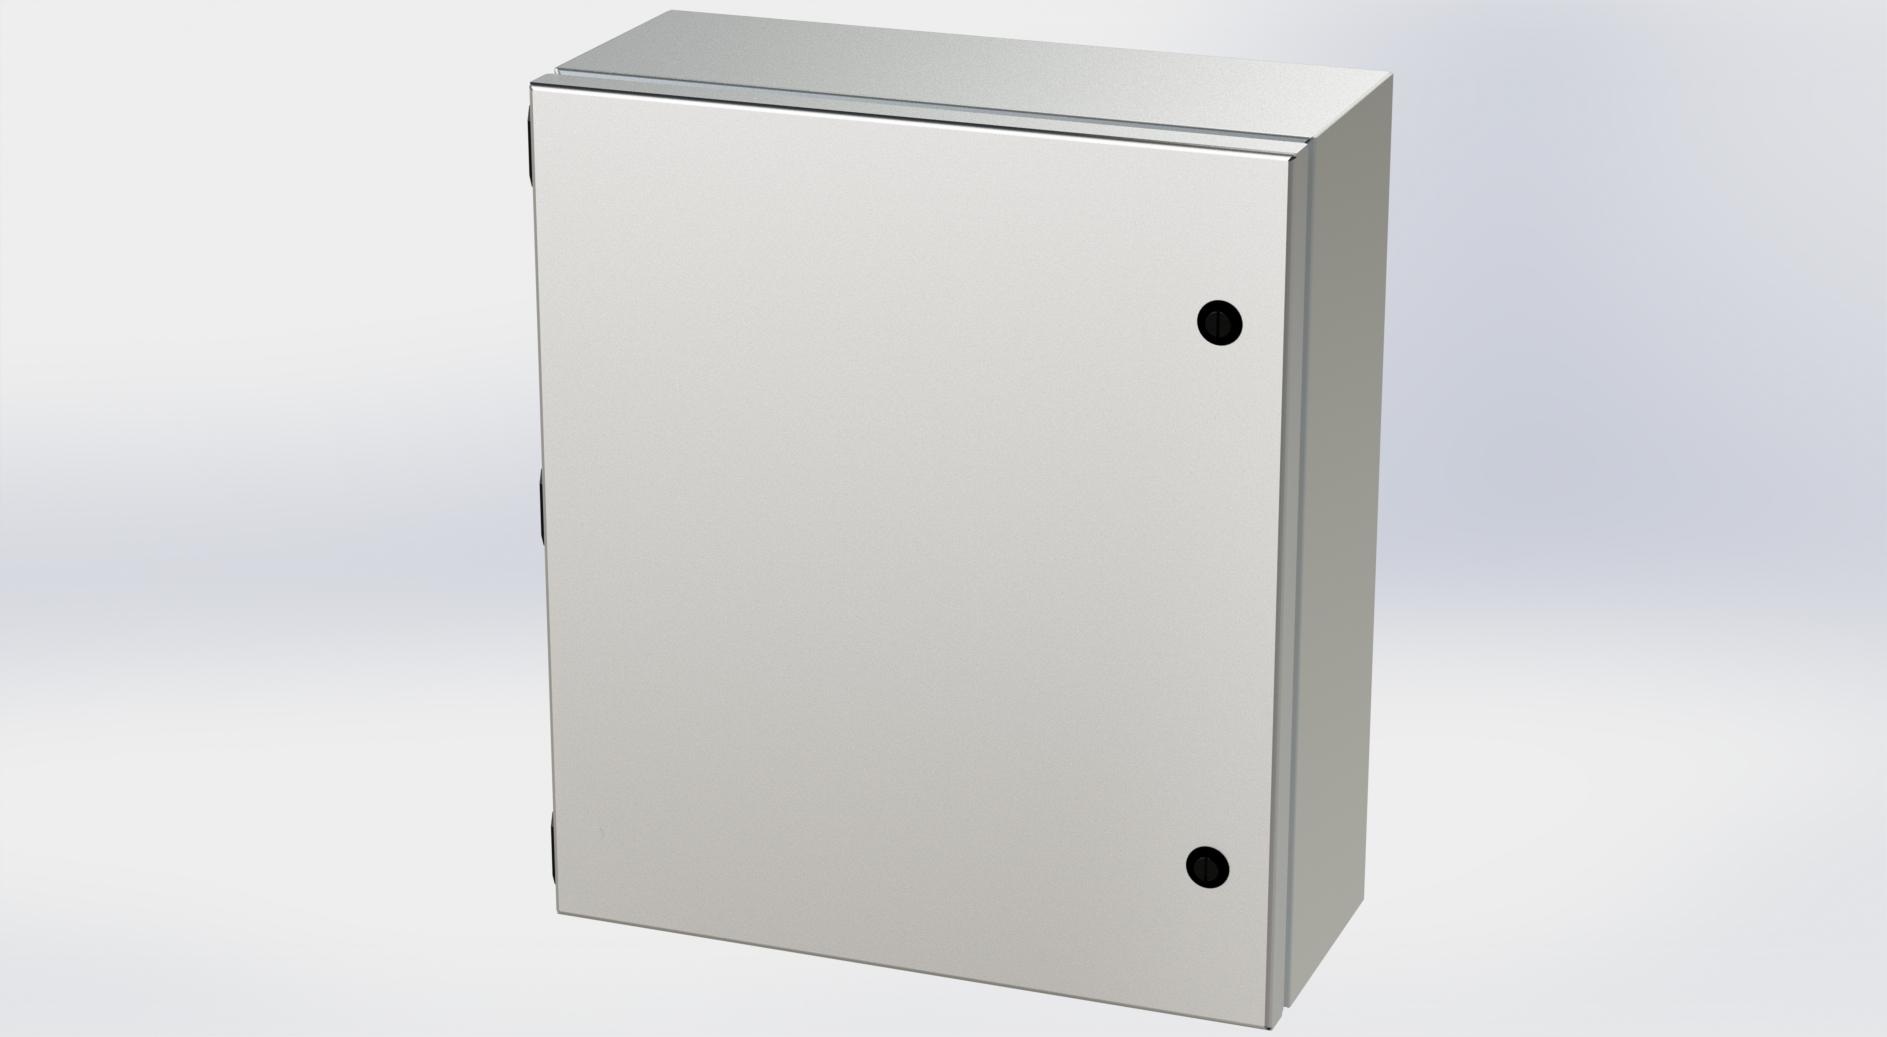 Saginaw Control SCE-1614ELJSS S.S. ELJ Enclosure, Height:16.00", Width:14.00", Depth:6.00", #4 brushed finish on all exterior surfaces. Optional sub-panels are powder coated white.